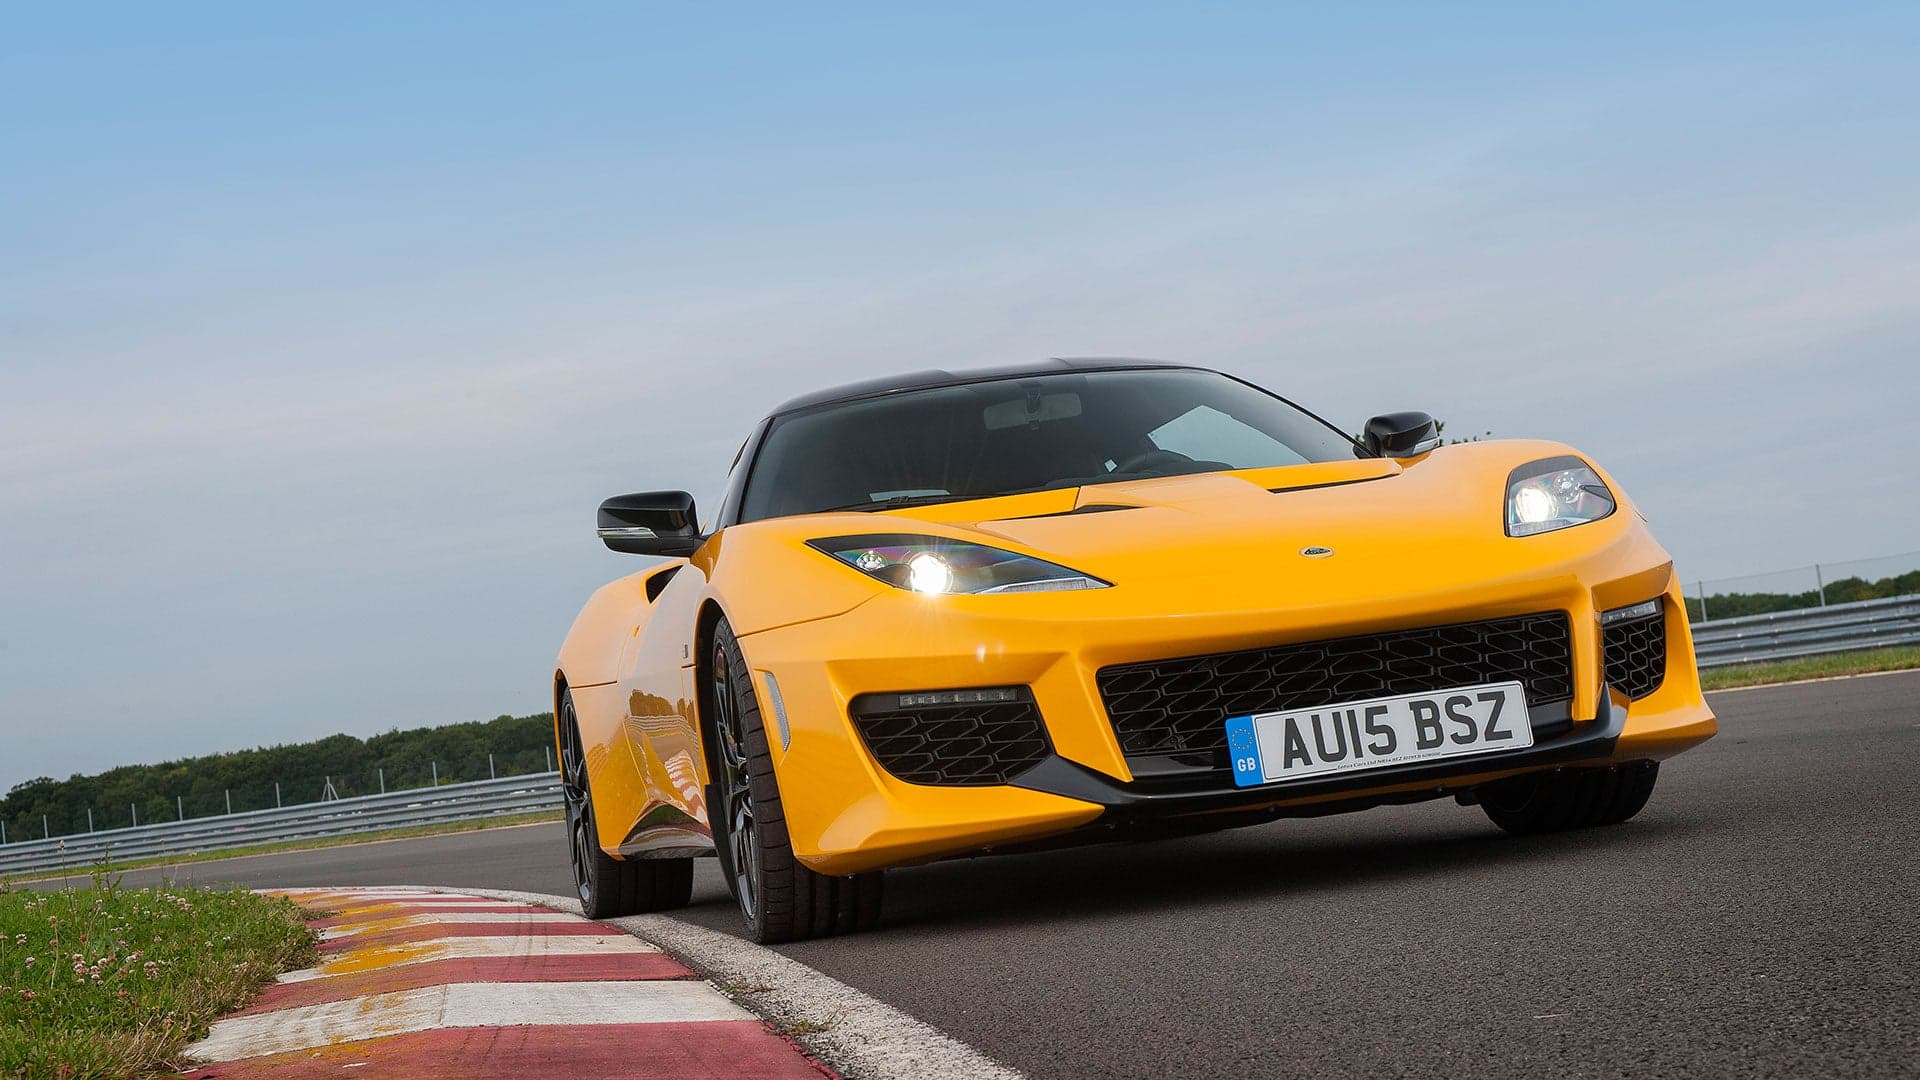 The Evora 400 Sounds Like the Carbureted Lotus Roadsters We Love